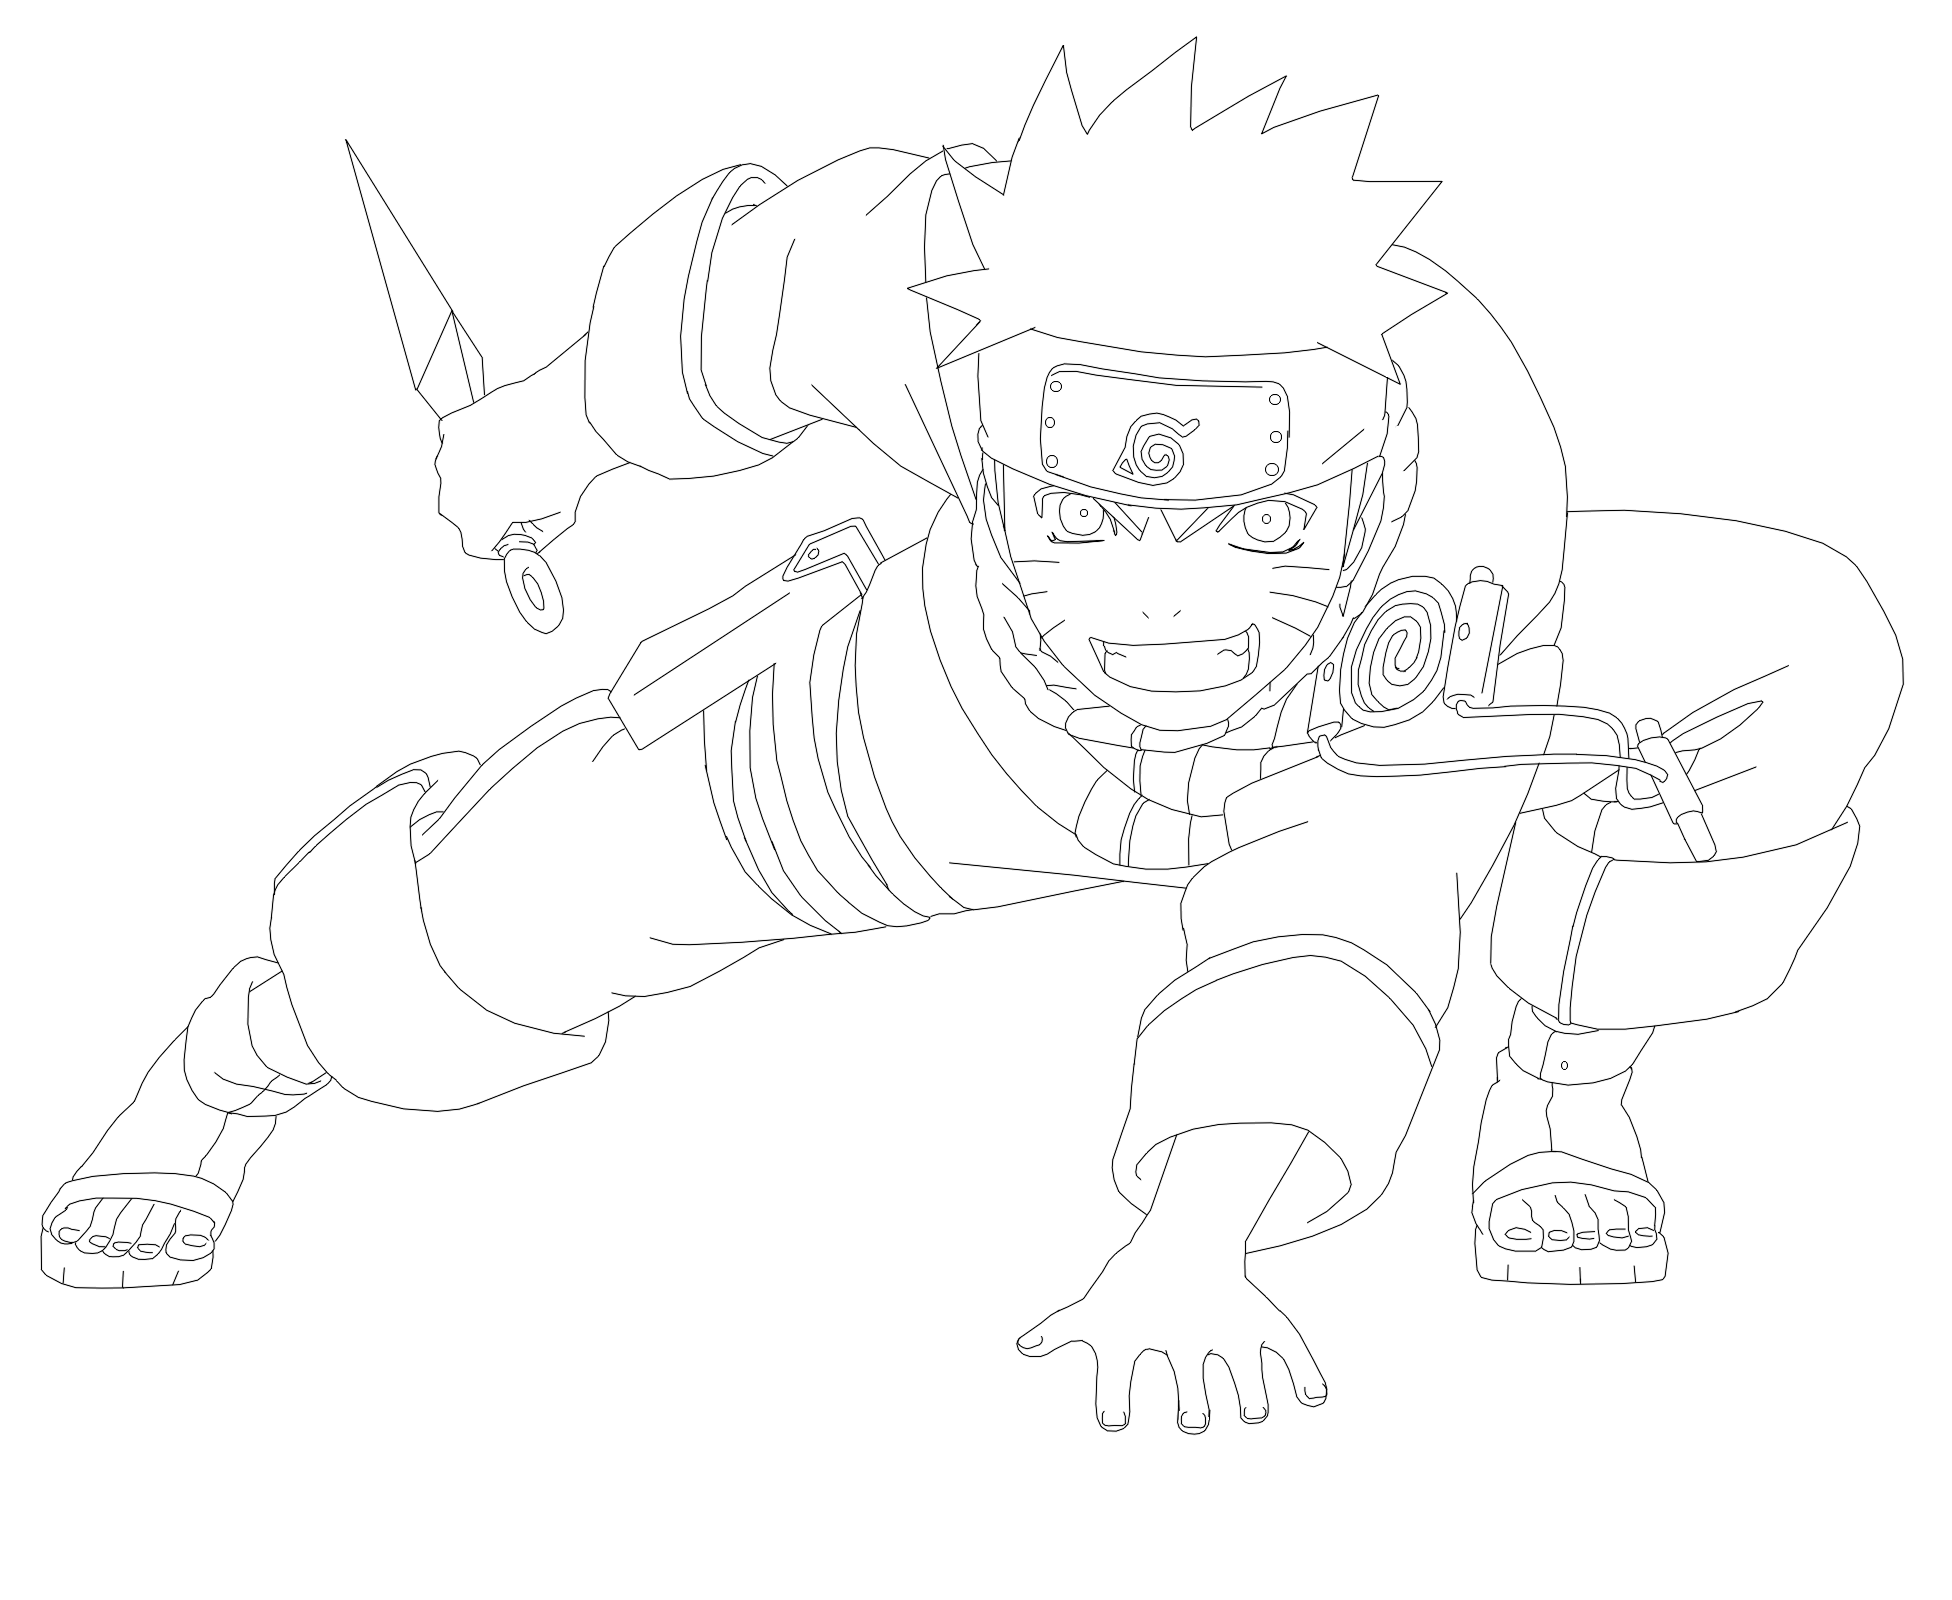 Naruto Uzumaki pts - Lineart colored by DennisStelly on DeviantArt